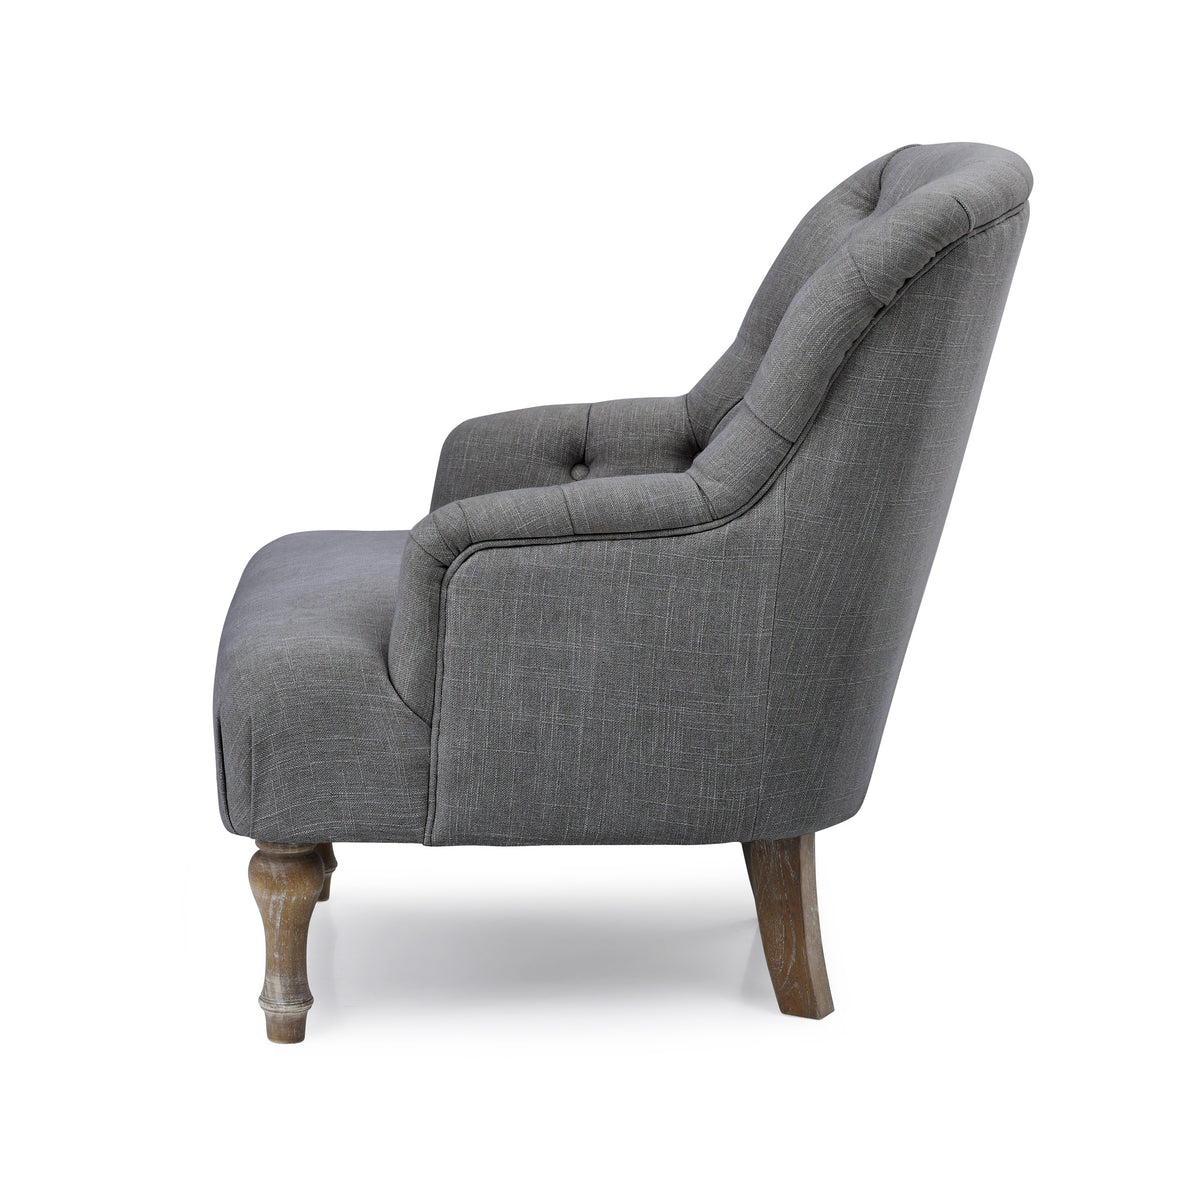 Charcoal Linen Fabric Bianca Armchair from Roseland Furniture